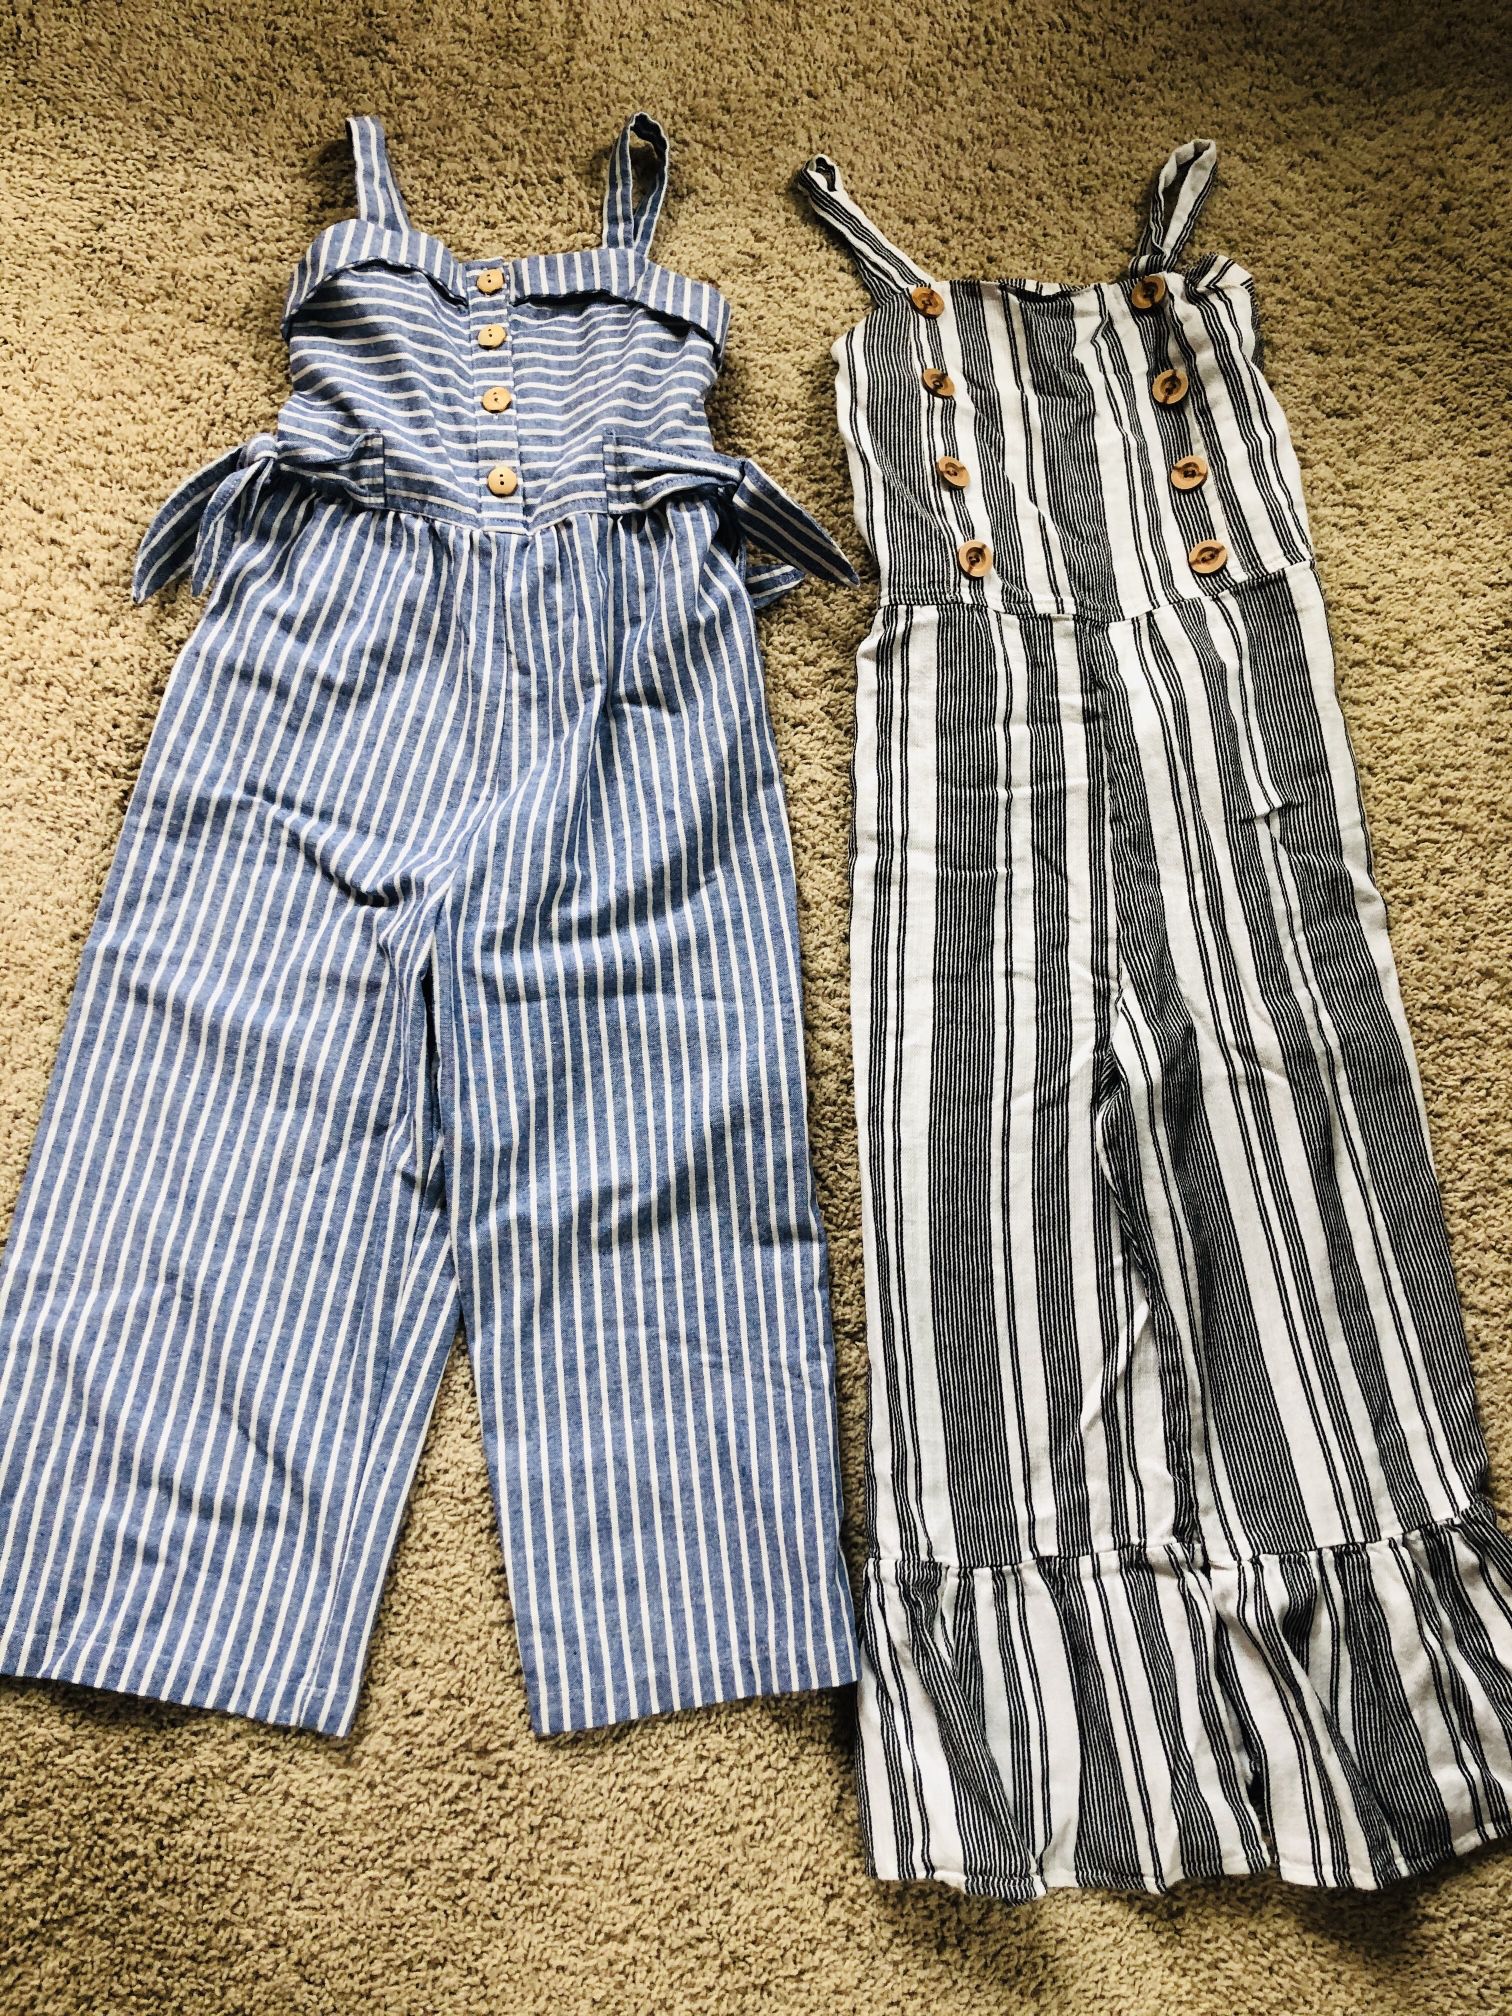 Girls 10/12 Pant Suits $8 For Both